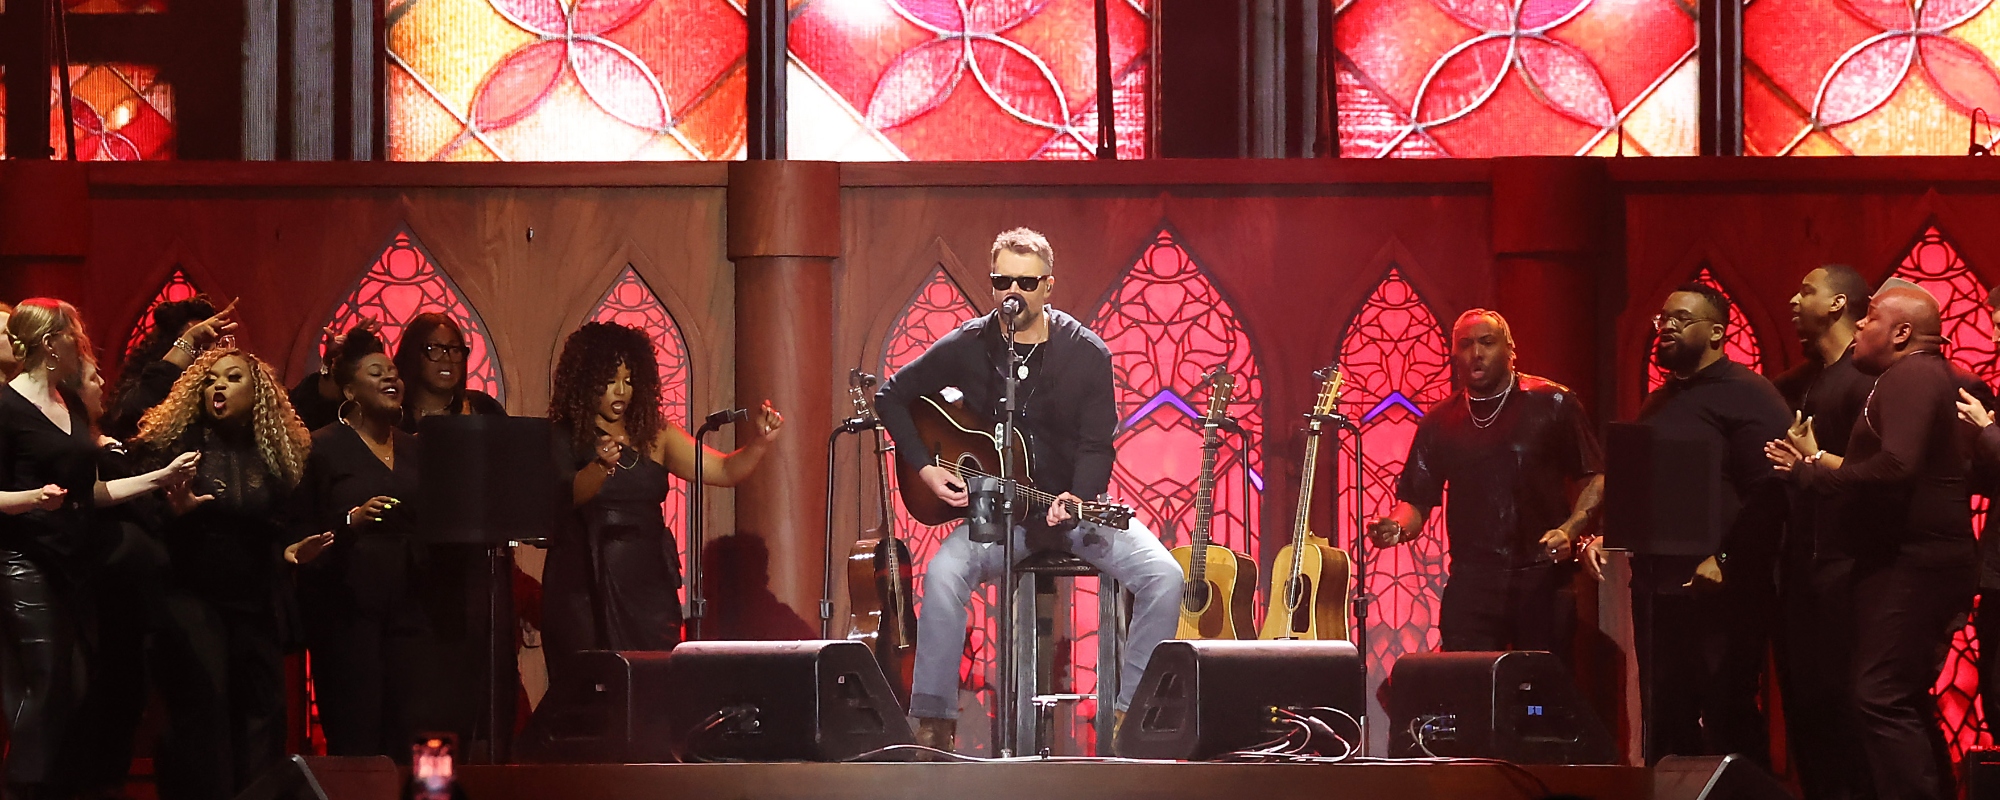 Eric Church’s Gospel-Inspired Set at Stagecoach Had Fans Going To See Nickelback Instead